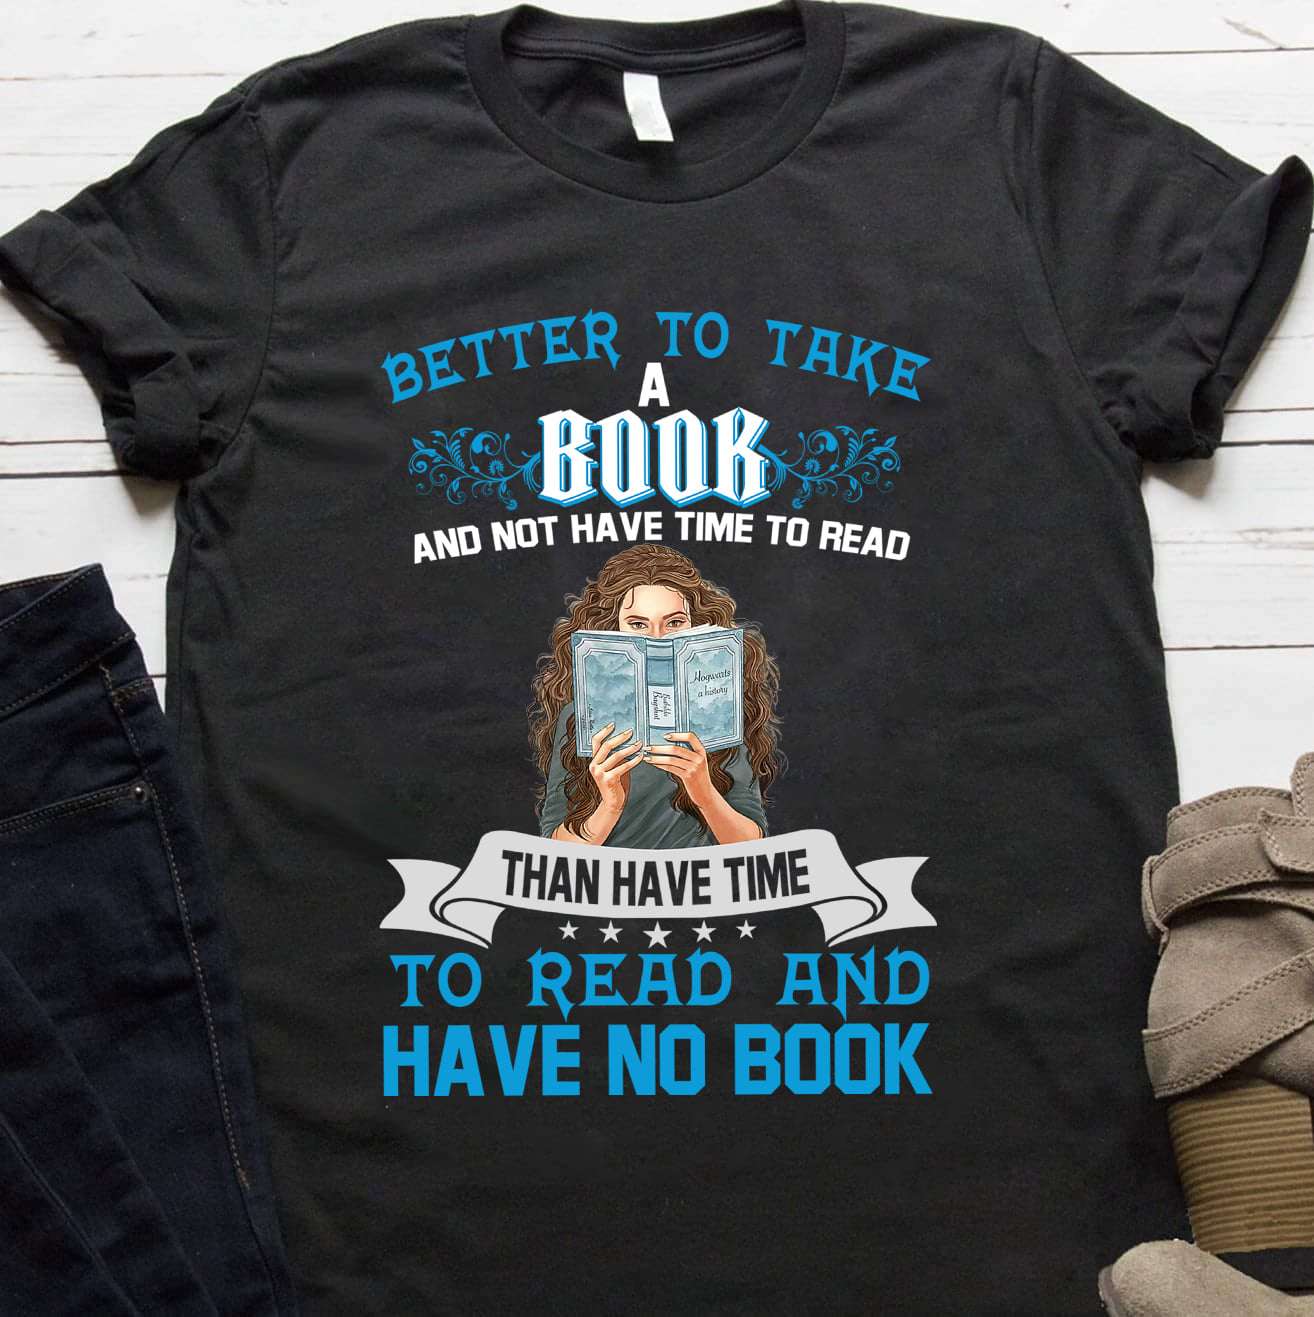 Book Girl - Better to take a book and not have time to read than have time to read and have no book